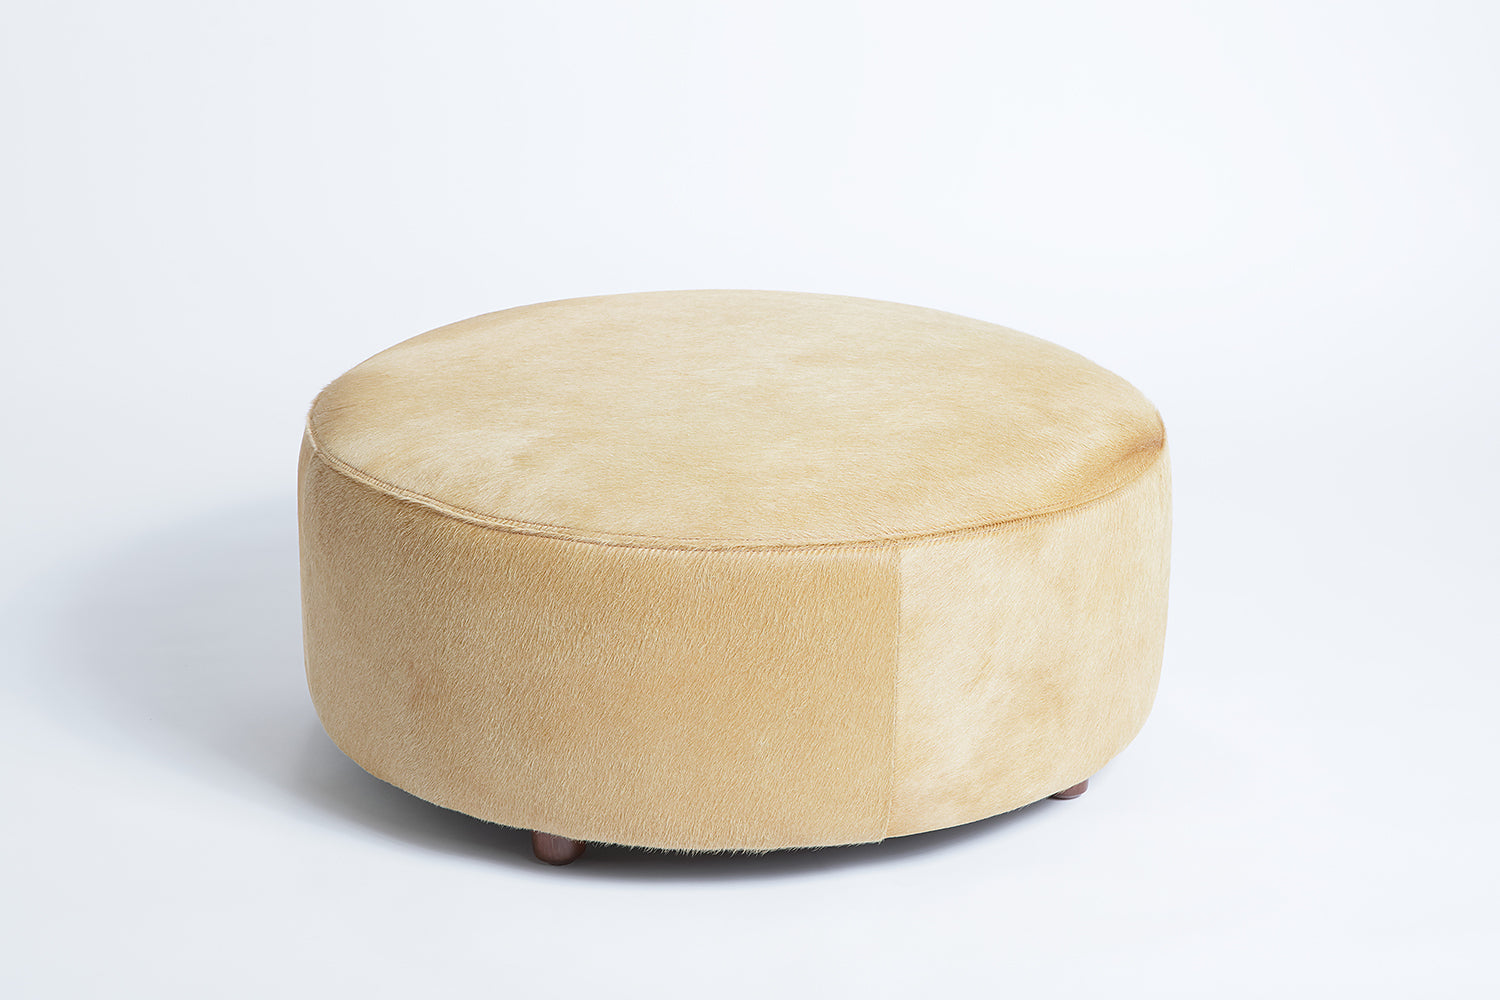 Beige Round Cowhide Ottoman Stool Pouf Coffee Table Homelosophy